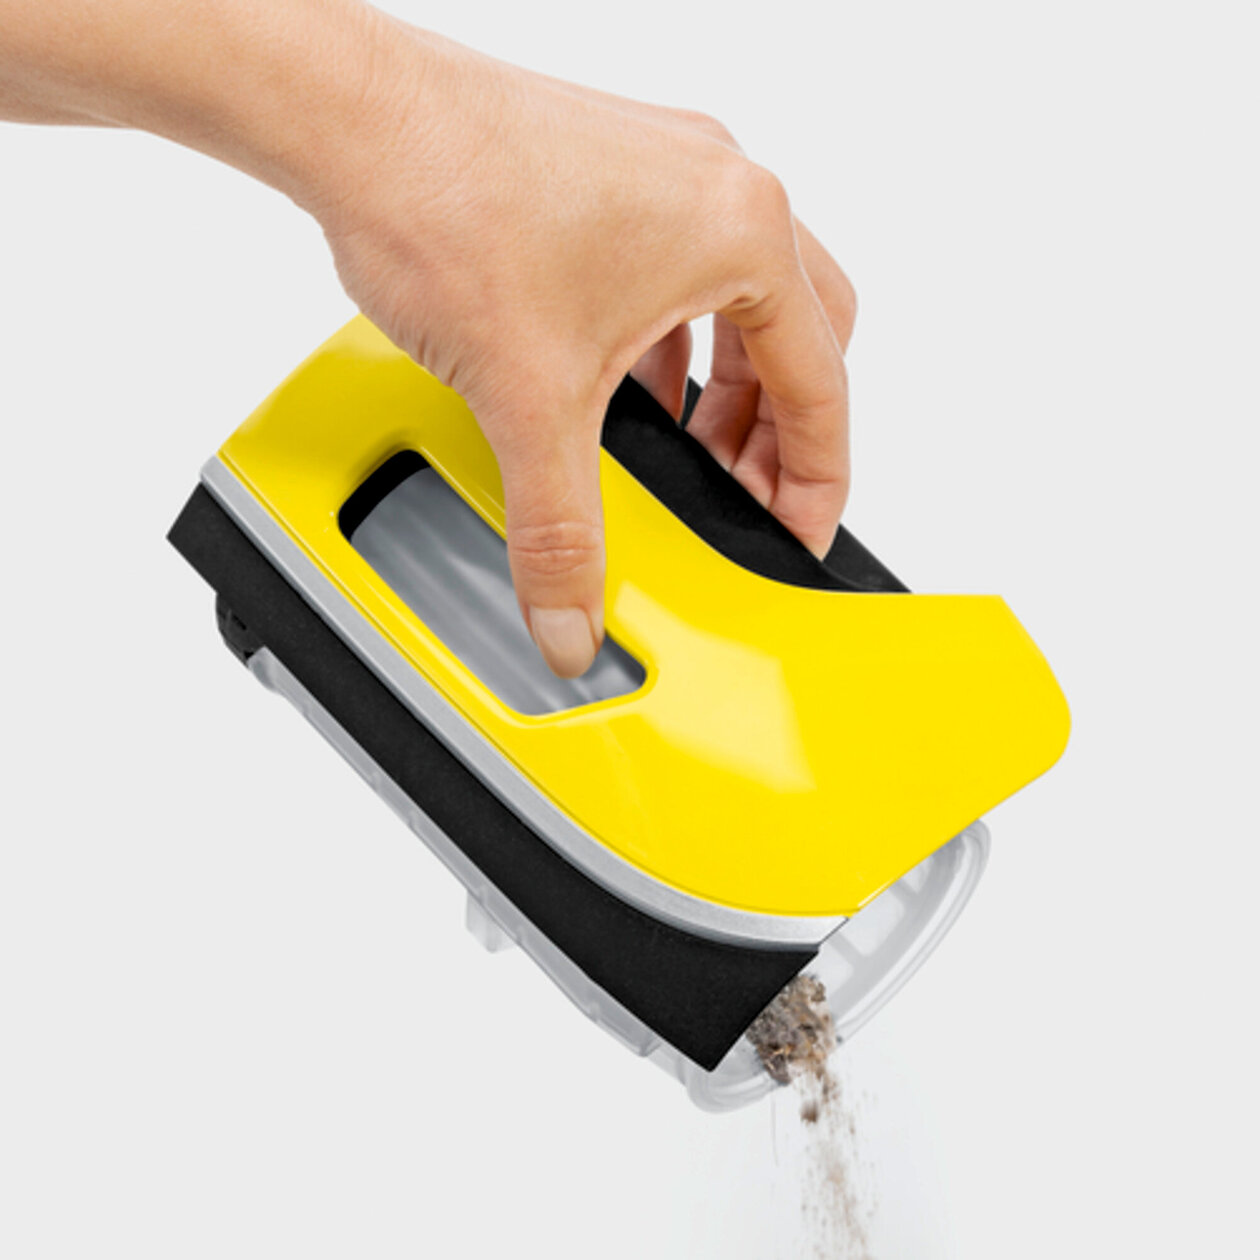 Handheld vacuum cleaner VC 5: Three-stage bagless filter system